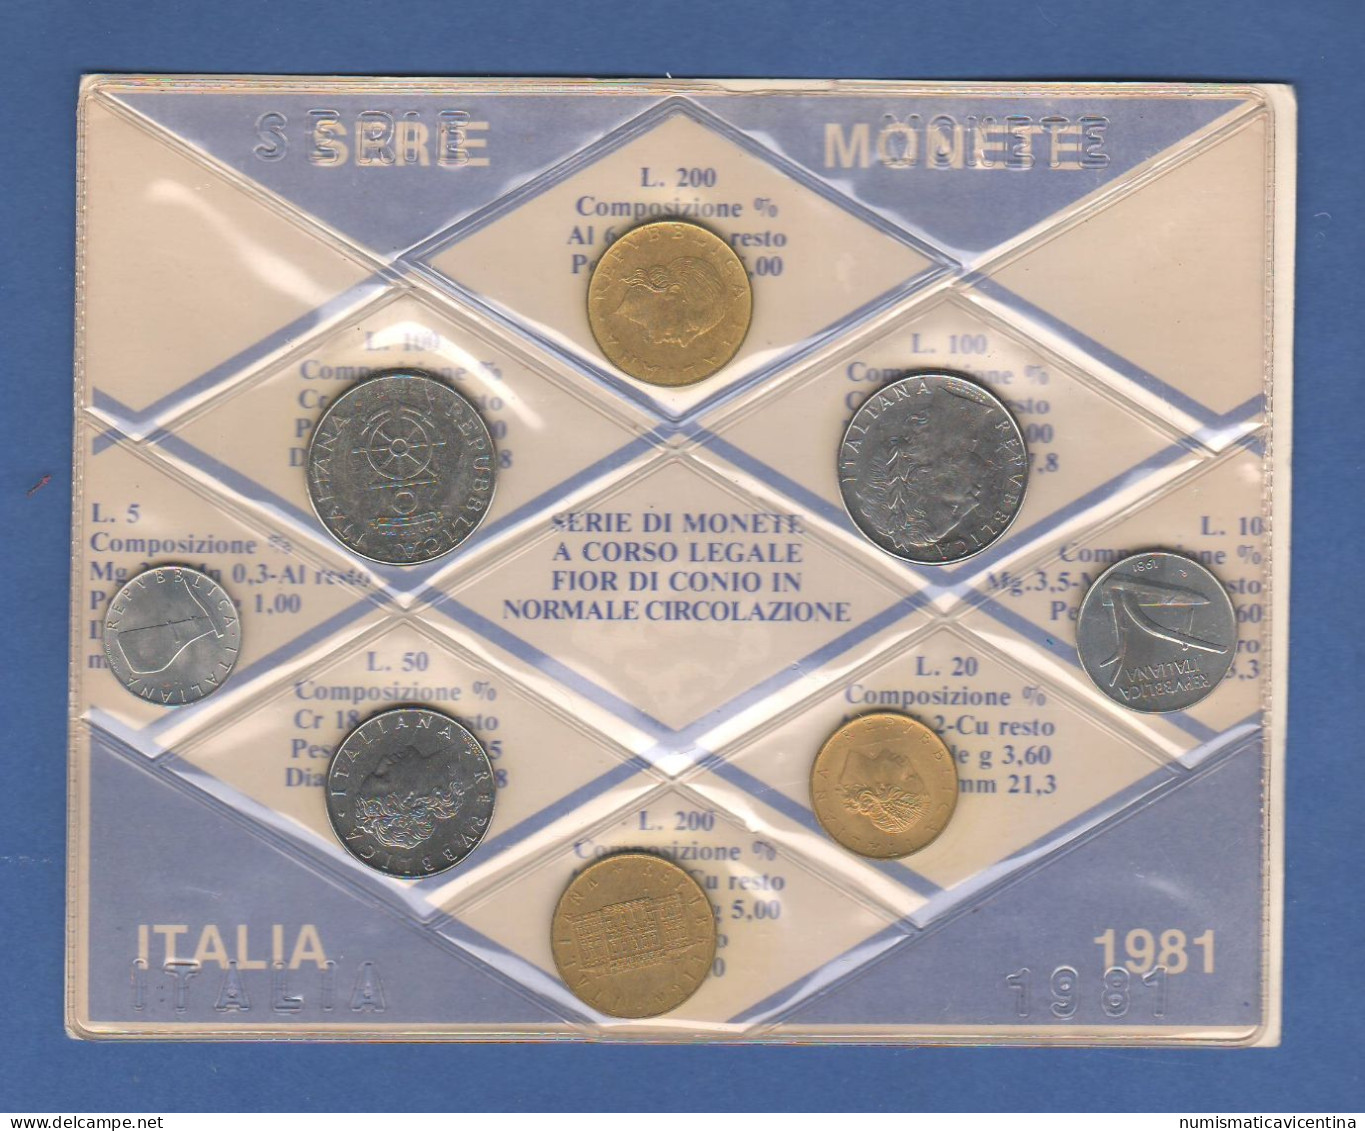 ITALIA 1981 Serie 8 Monete 5 10 20 50 100 100 200 200 Lire FDC UNC Italy Coin Set Private Issues Emissioni Private - Nieuwe Sets & Proefsets